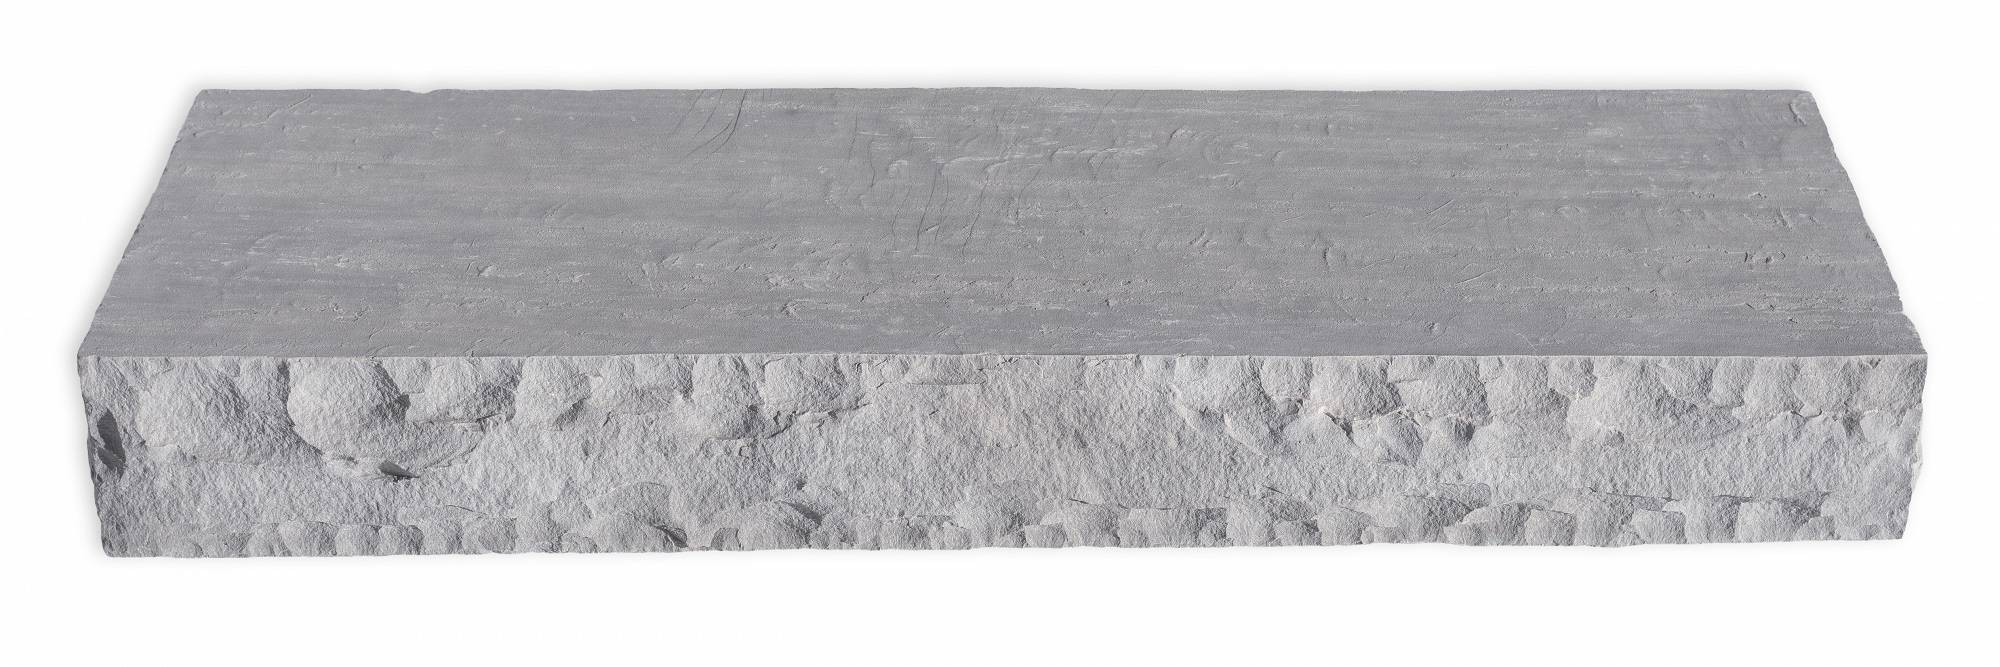 appalachian grey old world flagstone classic paver step stepper 16 by 48 by 6 inch exterior applications manufactured by f and m supply distributed by surface group